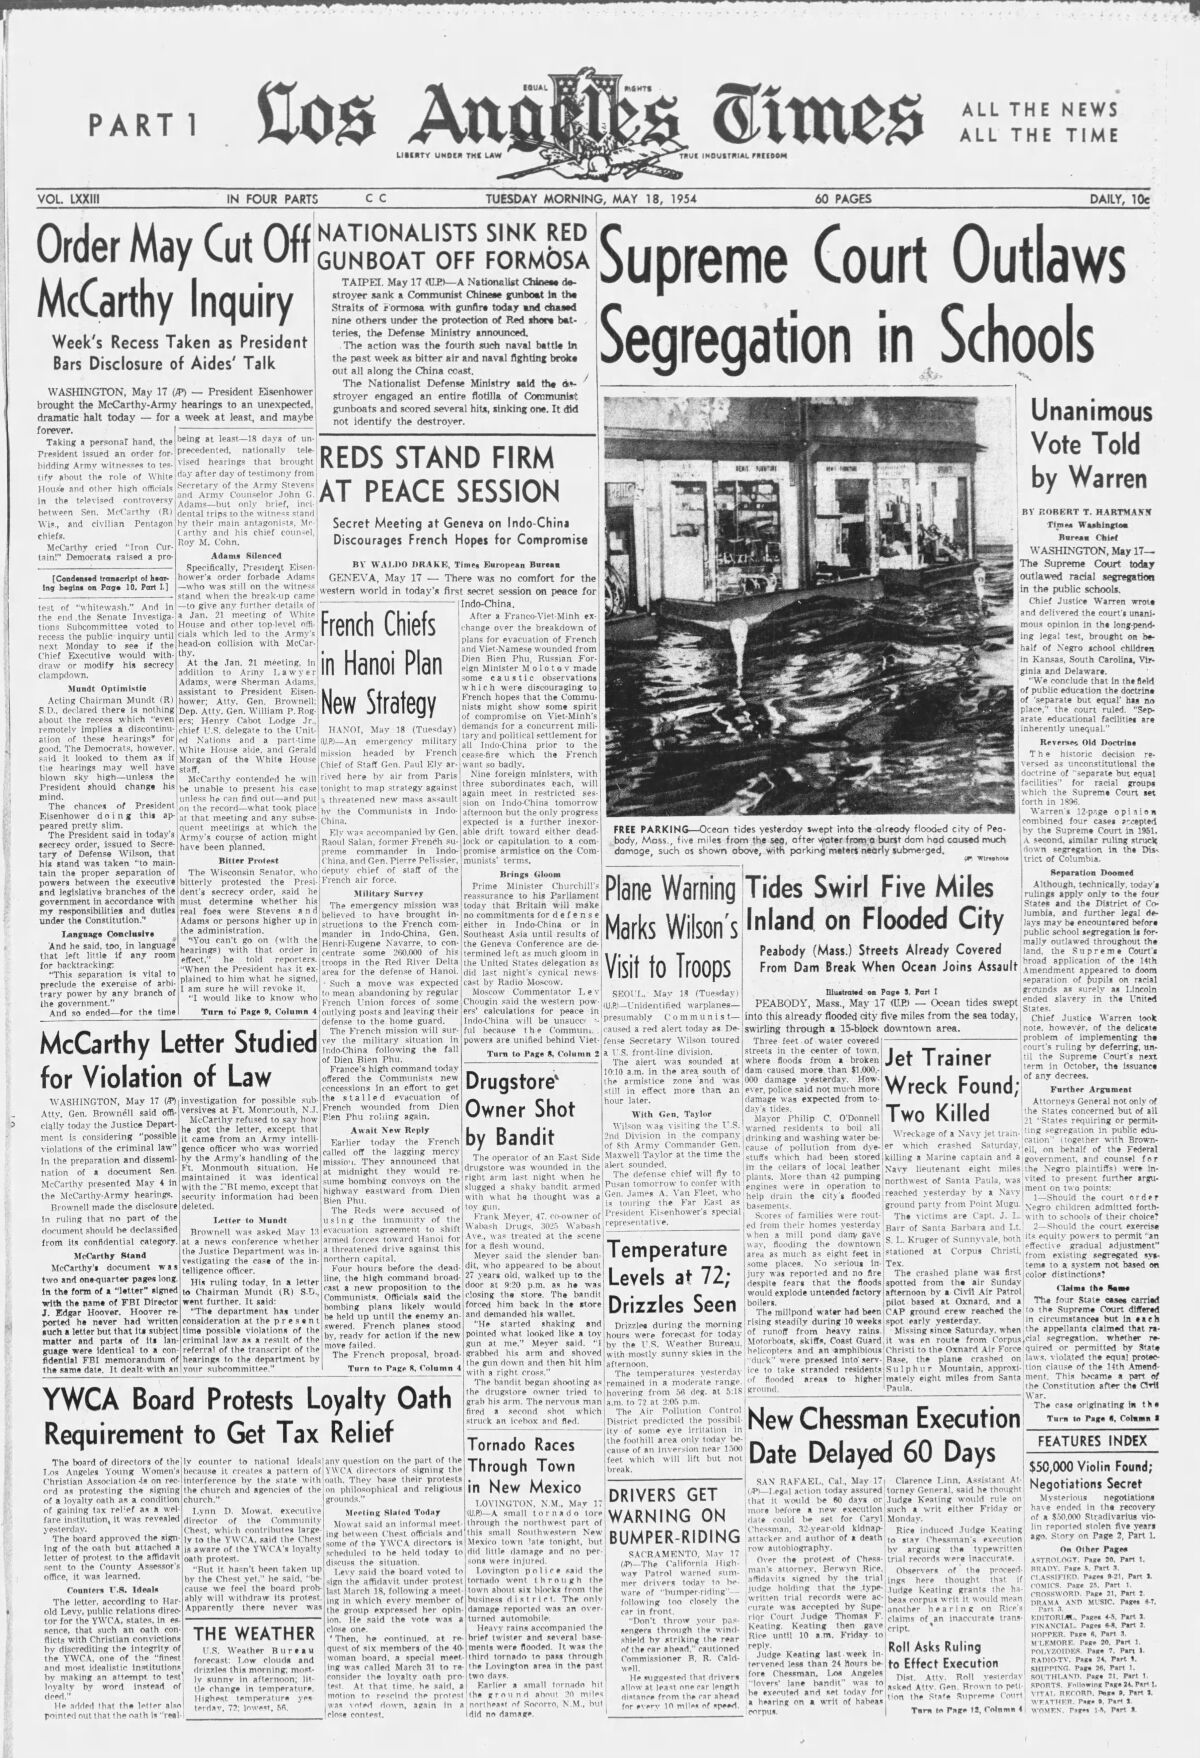 Newspaper clipping from May 17, 1954, highlighting the ban of segregation in schools